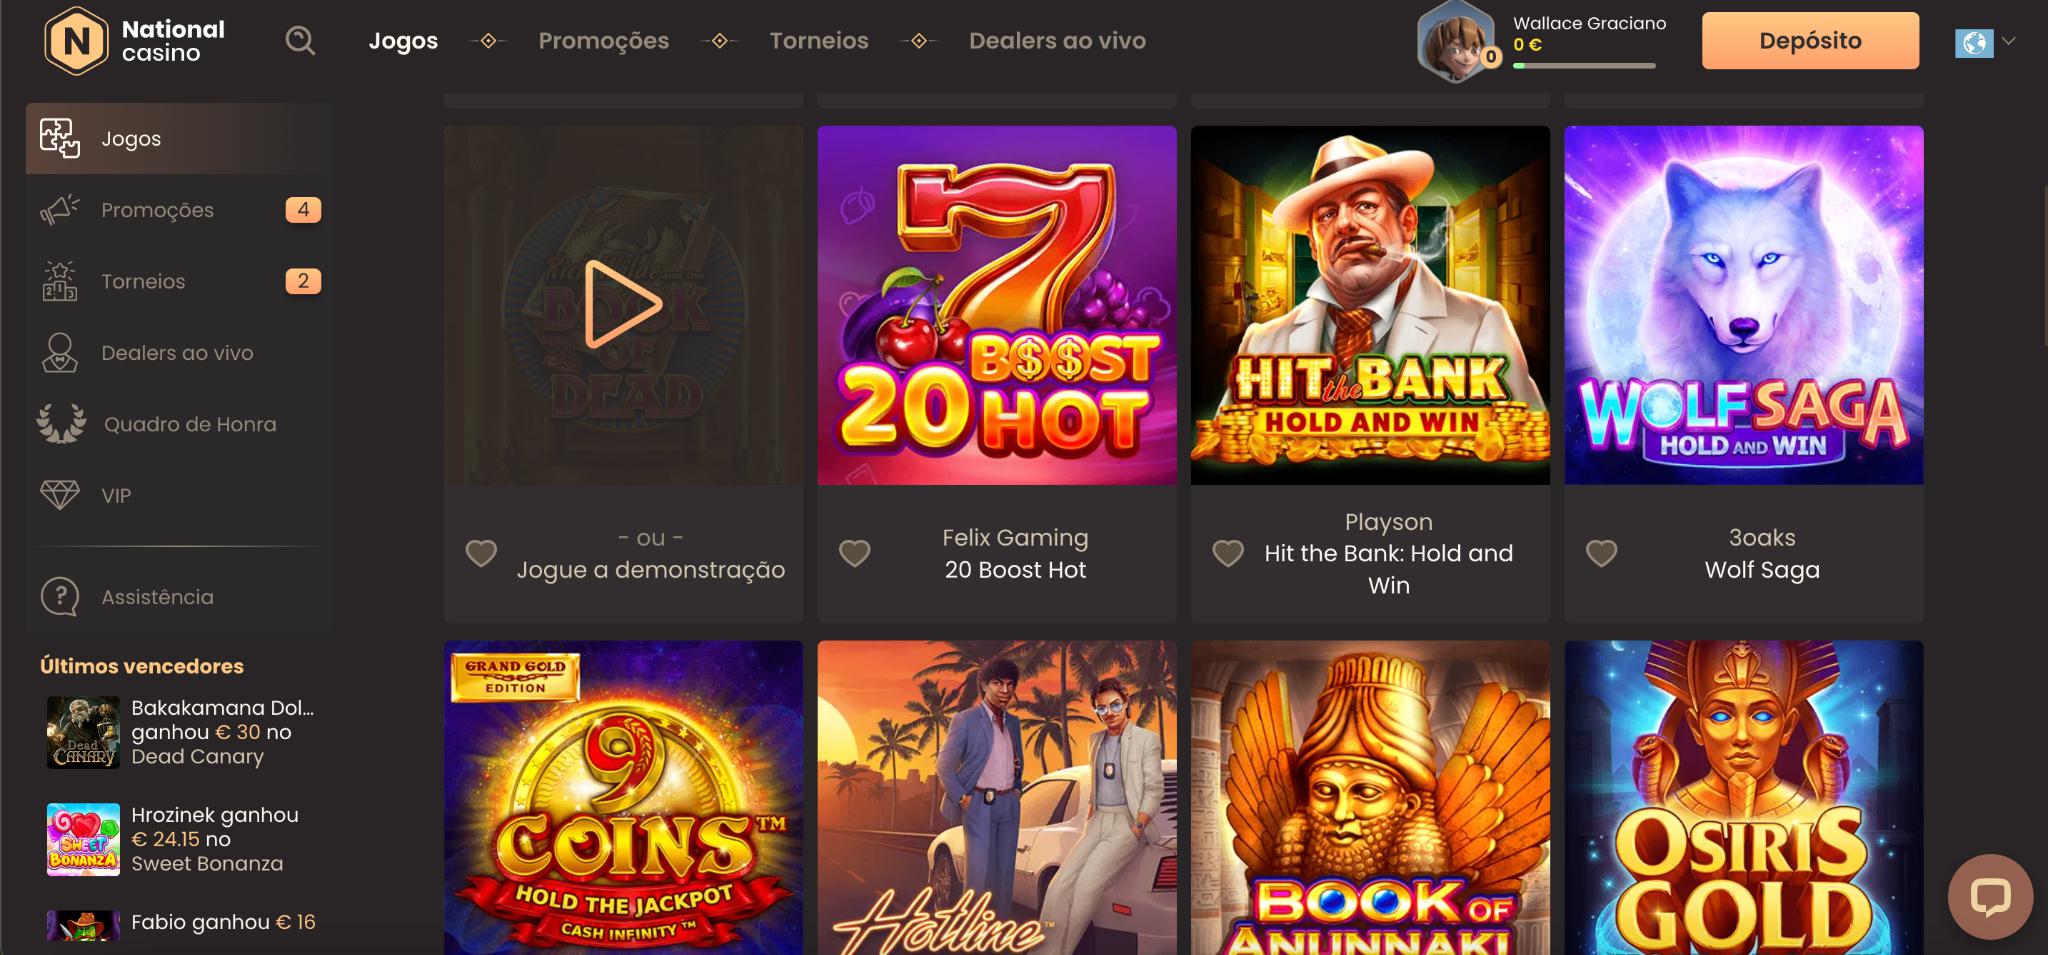 National Casino Top Games